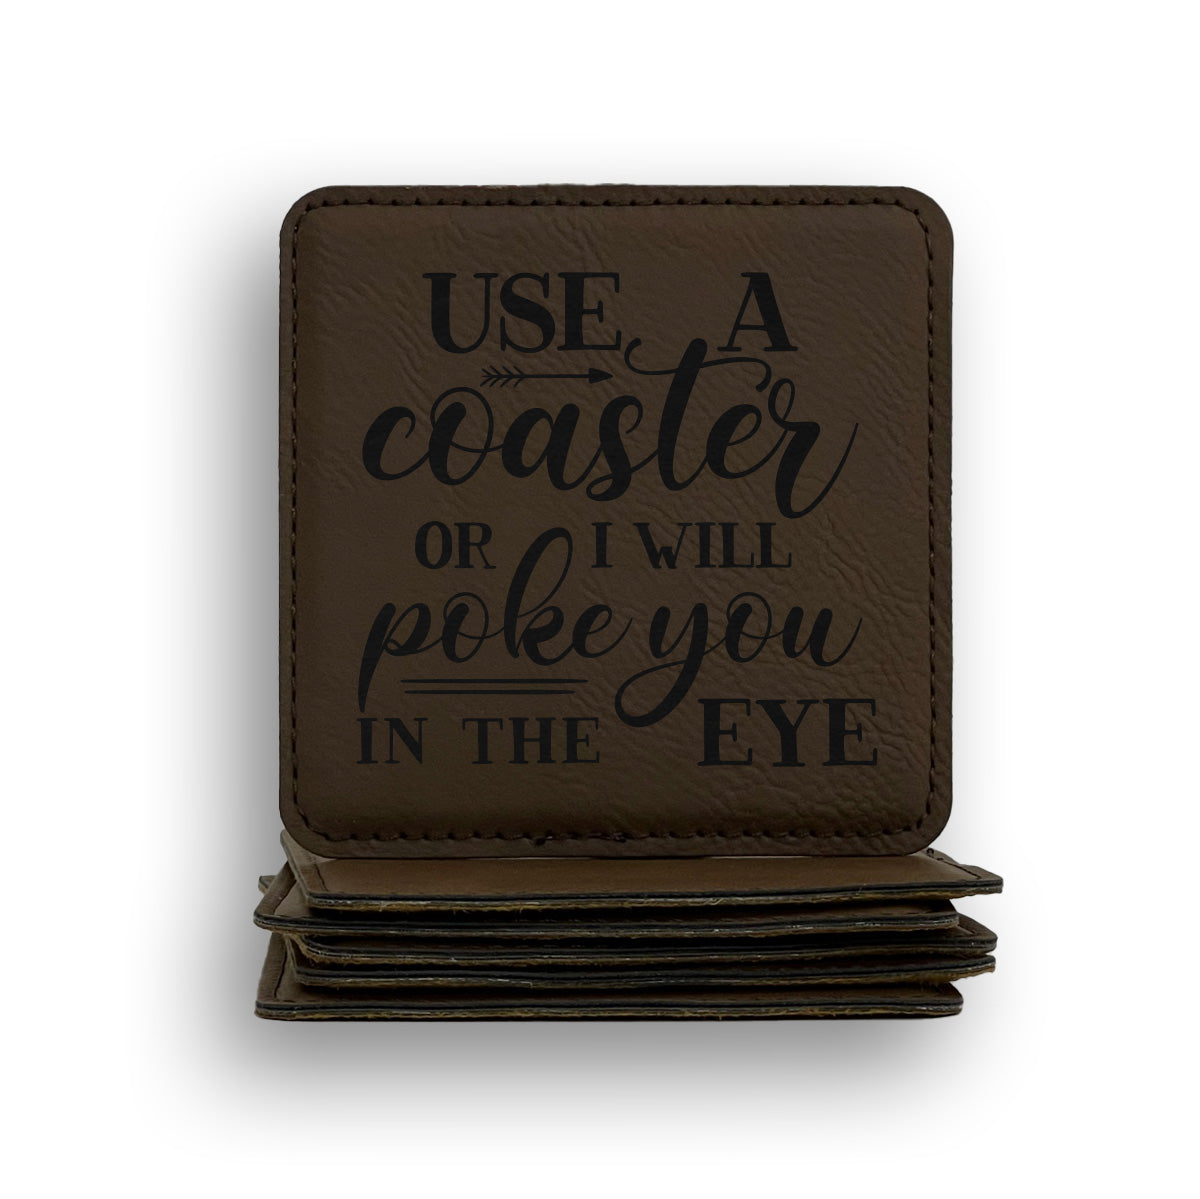 Use A Coaster Or I Will Poke You In The Eye Coaster